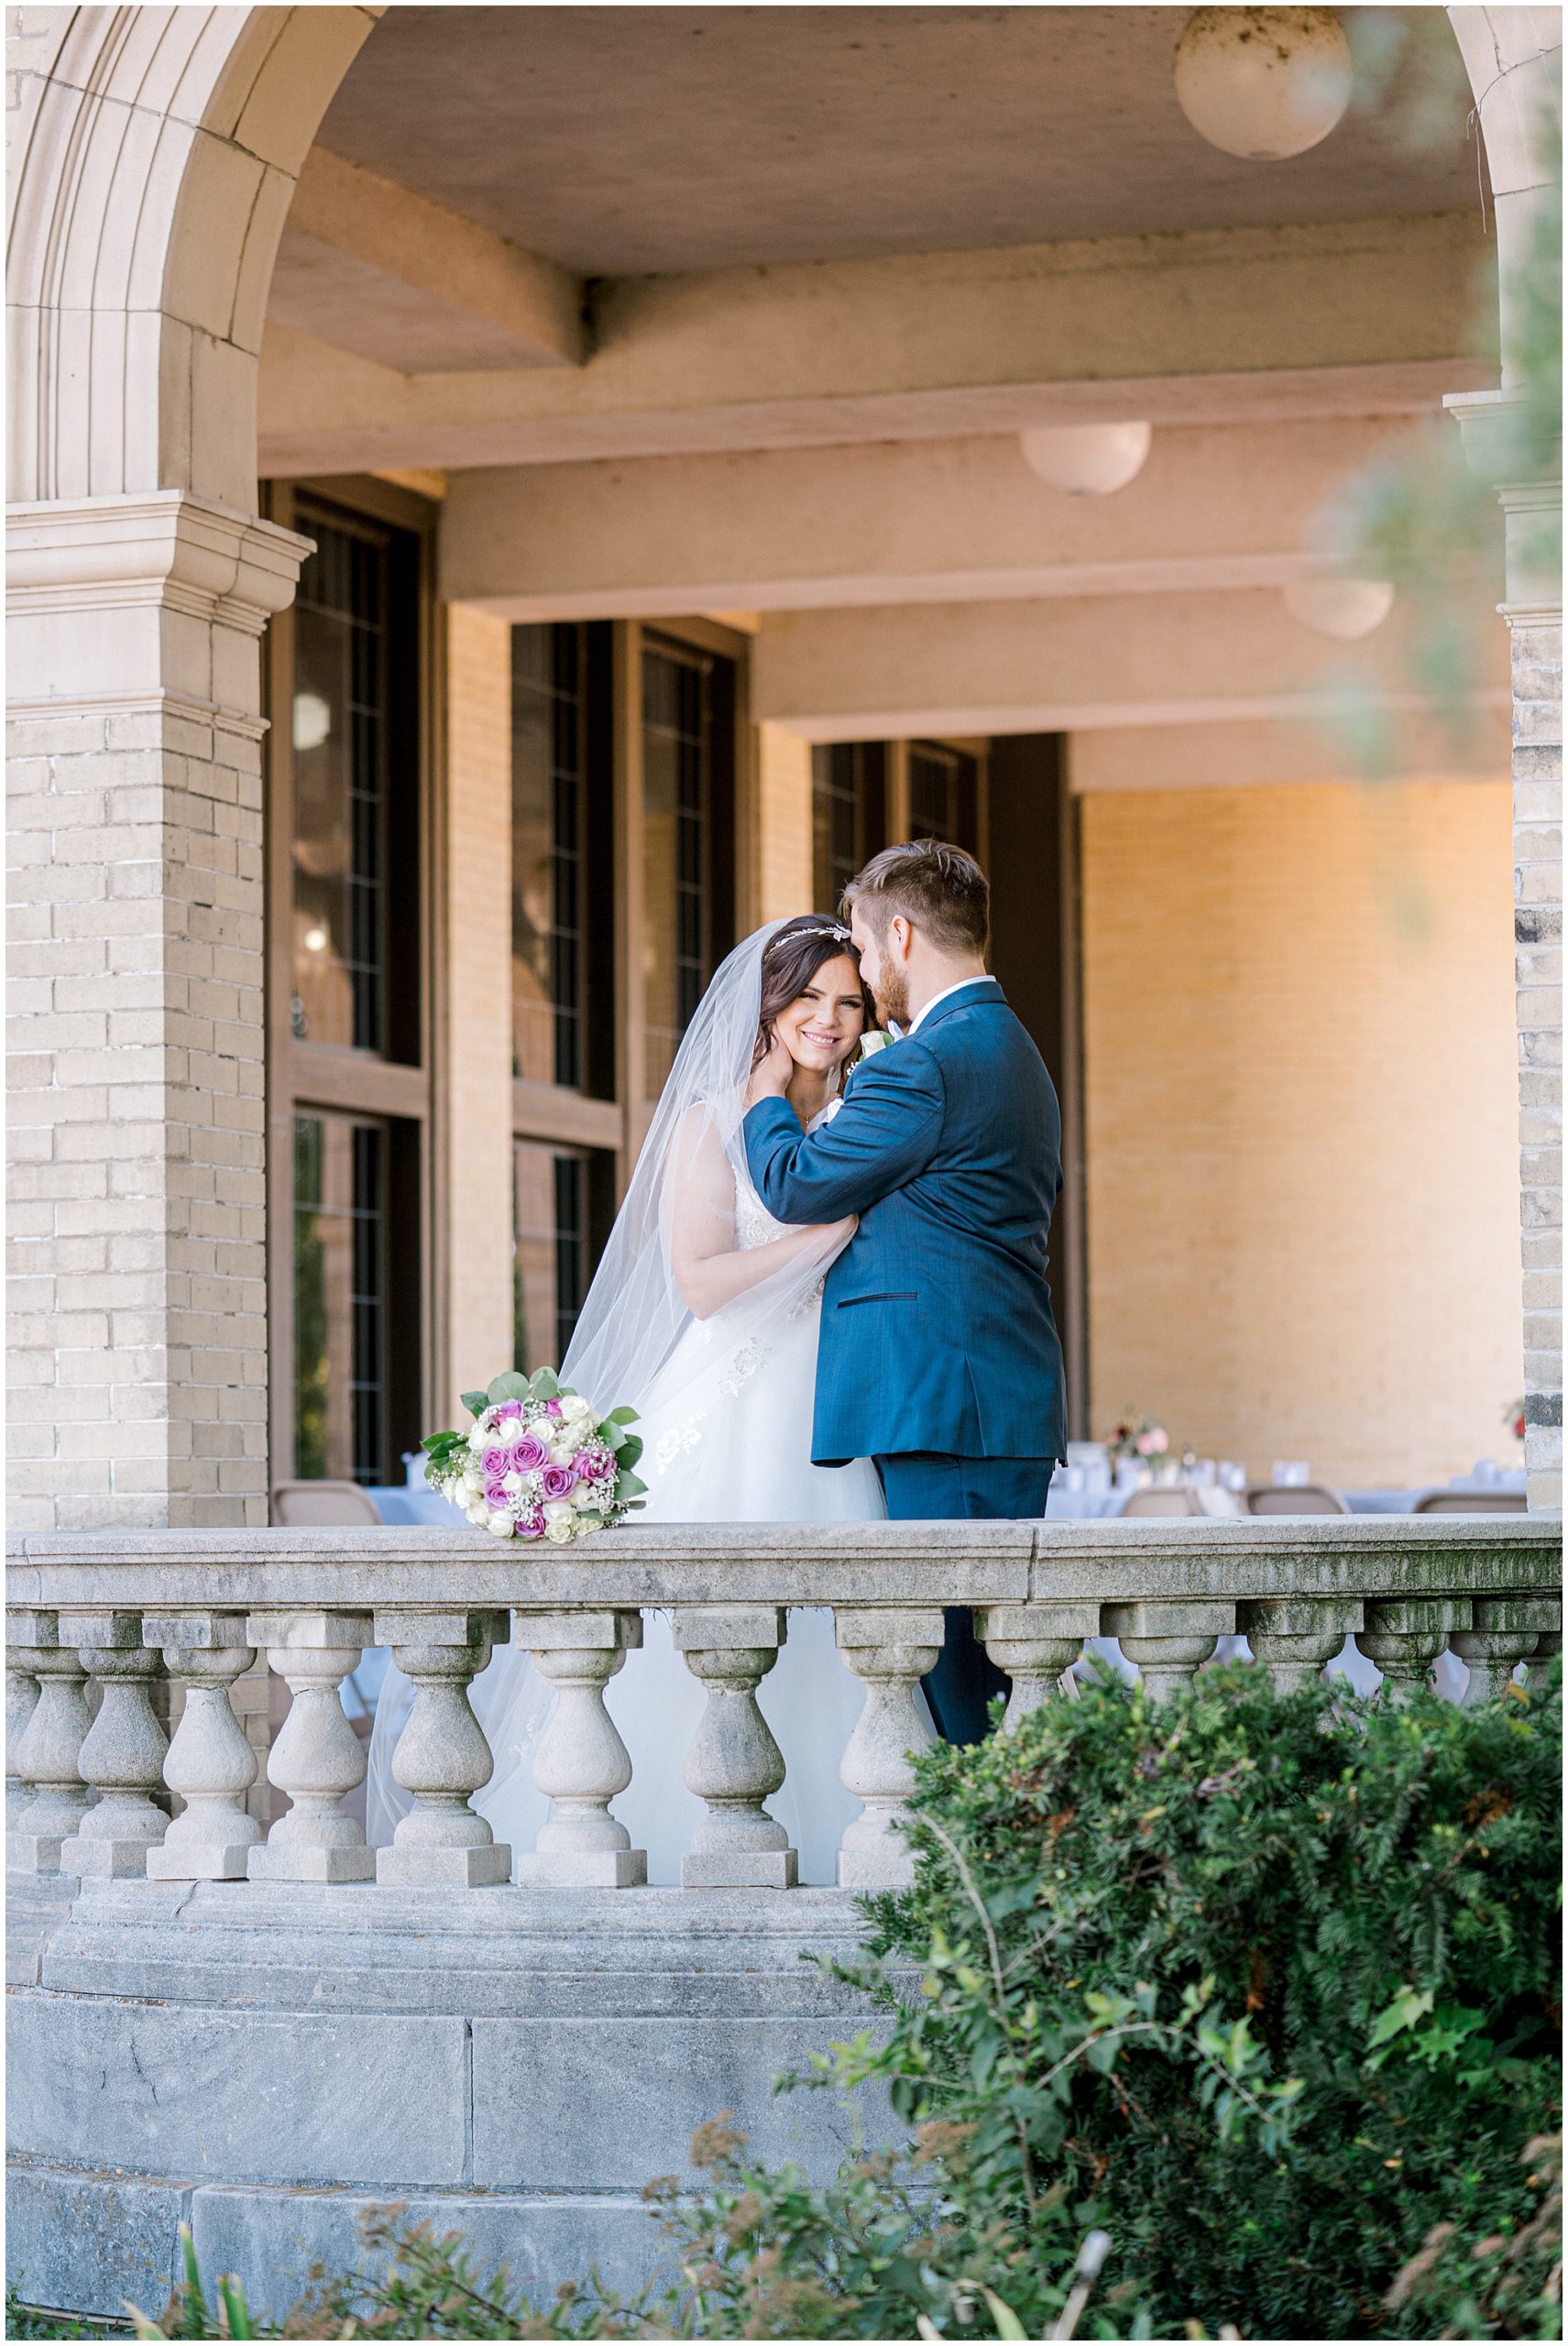 Stunning bride and groom photos at one of the Best Wedding Venues in Michigan